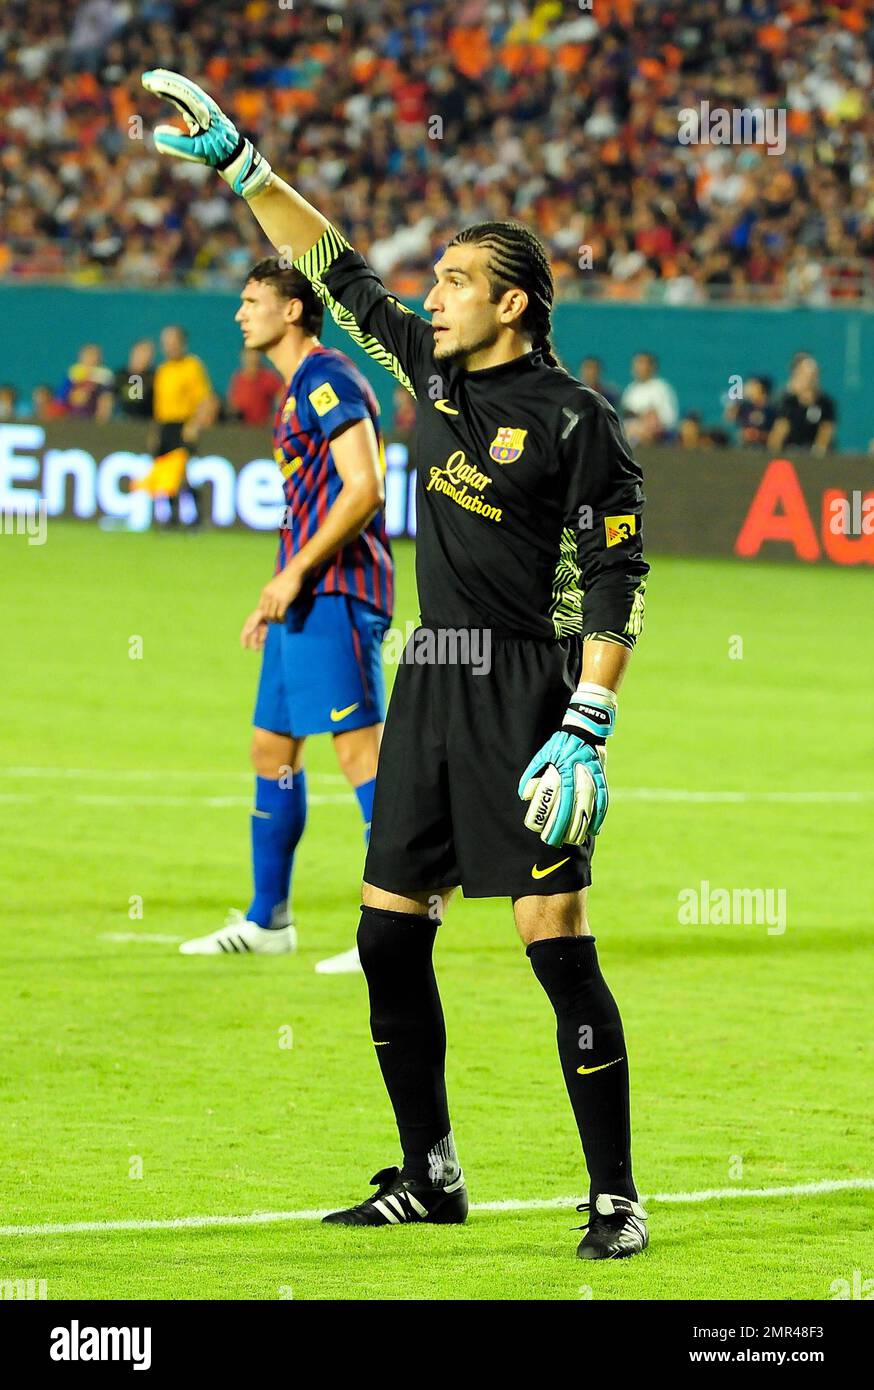 Shakira's boyfriend Gerard Pique (#3) plays with FC Barcelona in its match with CD Guadalajara during the Herbalife World Football Challenge match at Sun Life Stadium in Miami, FL. 3rd August 2011. Stock Photo